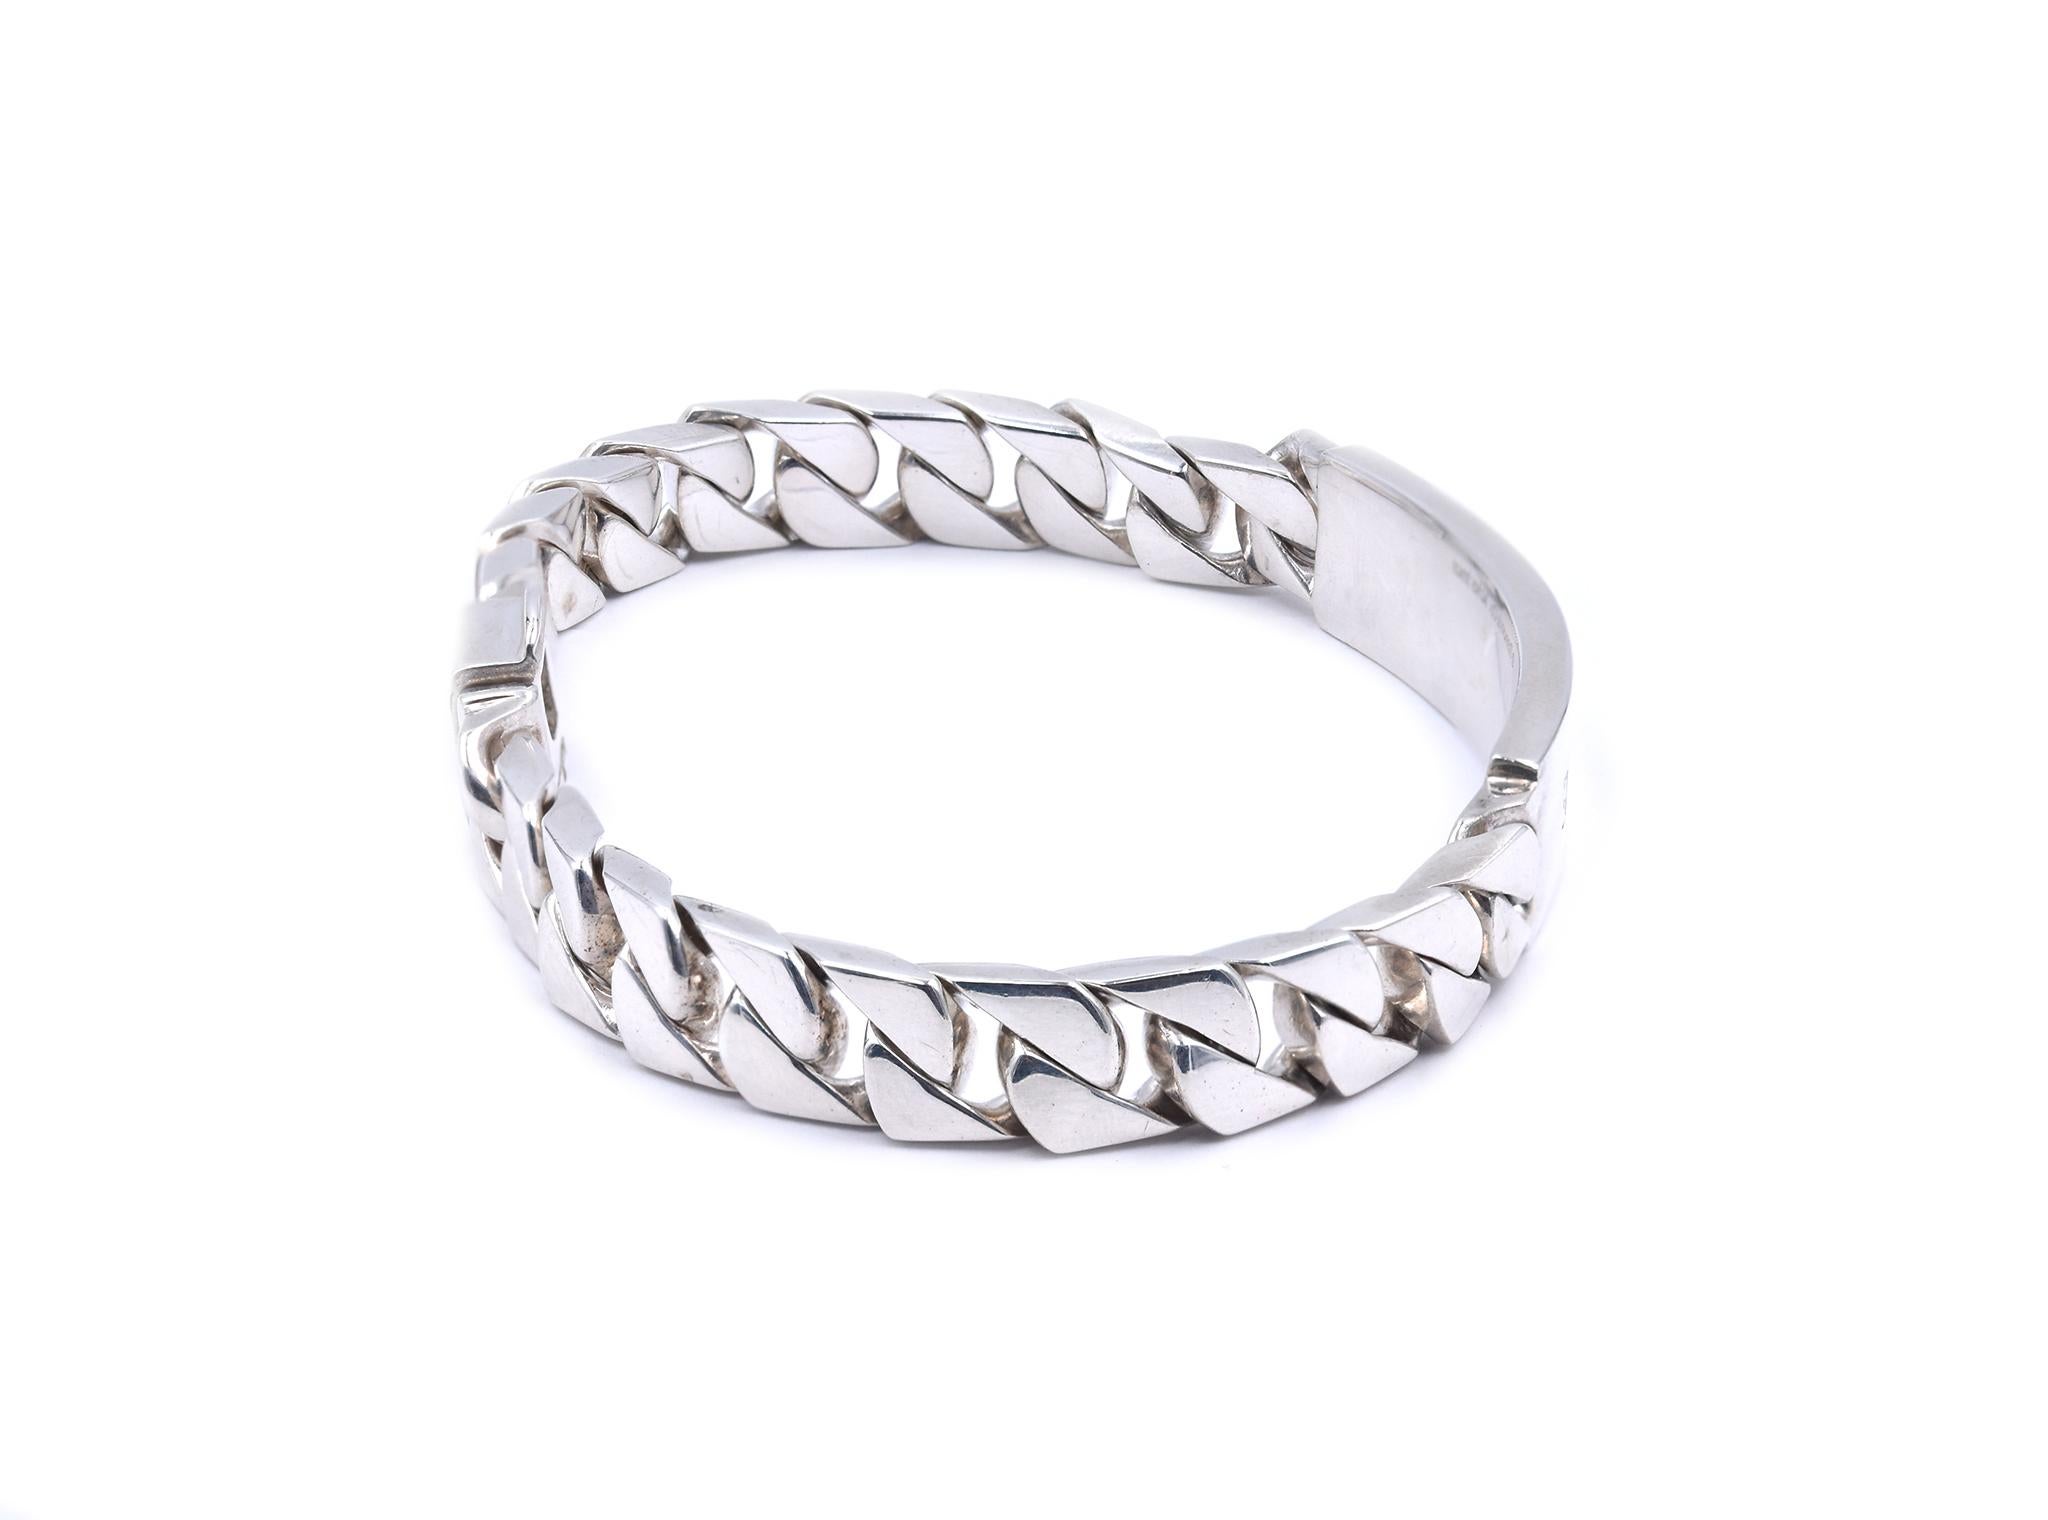 Designer: Tiffany & Co. 
Material: sterling silver
Dimensions: bracelet measures 8-inches long, 11mm wide
Weight: 53.01 grams
